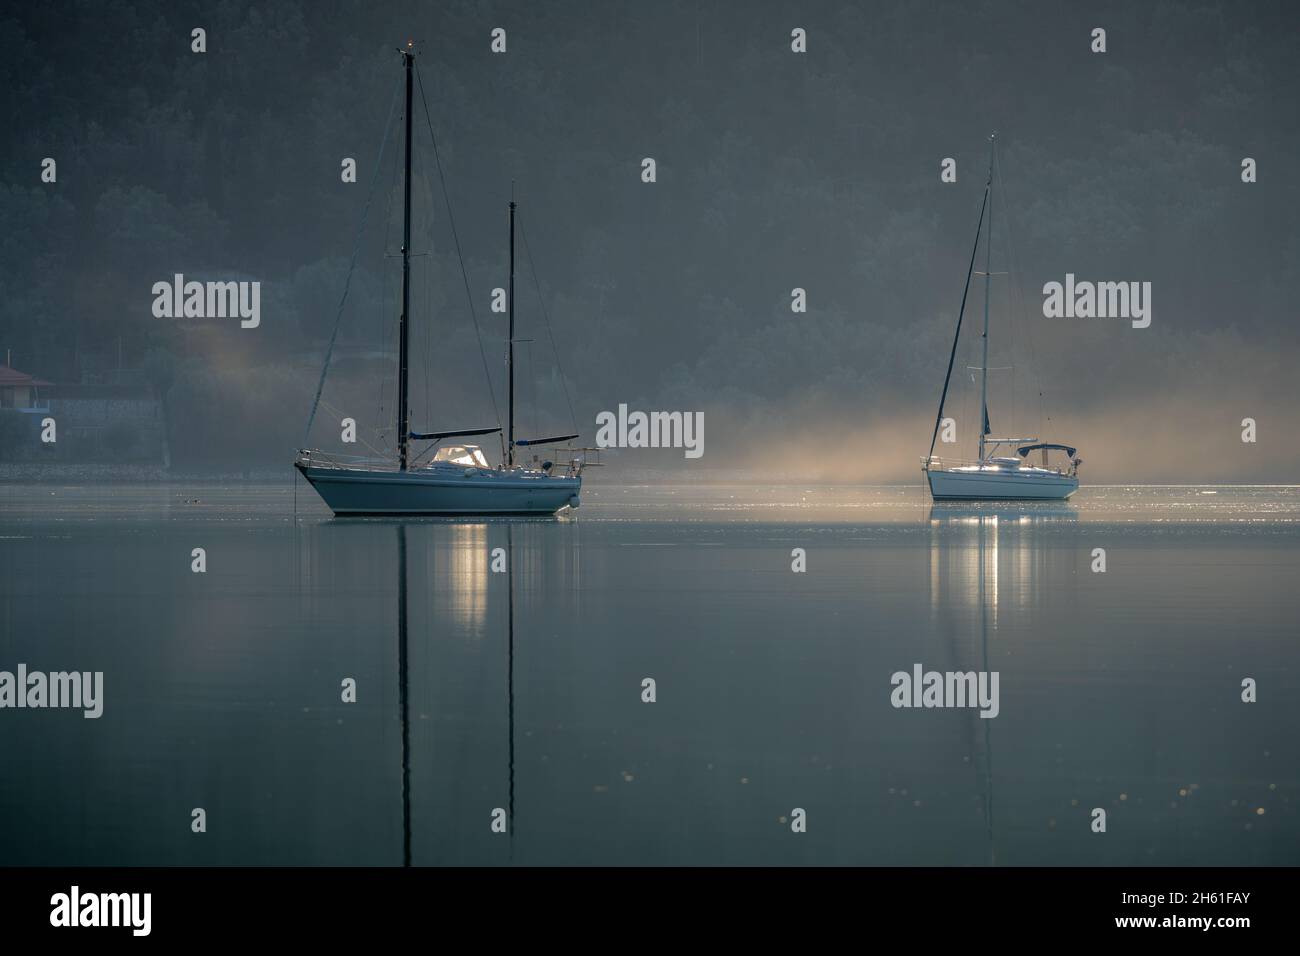 Yachts on the calm water of a sheltered bay casting reflections with morning mist on the water surface. Stock Photo